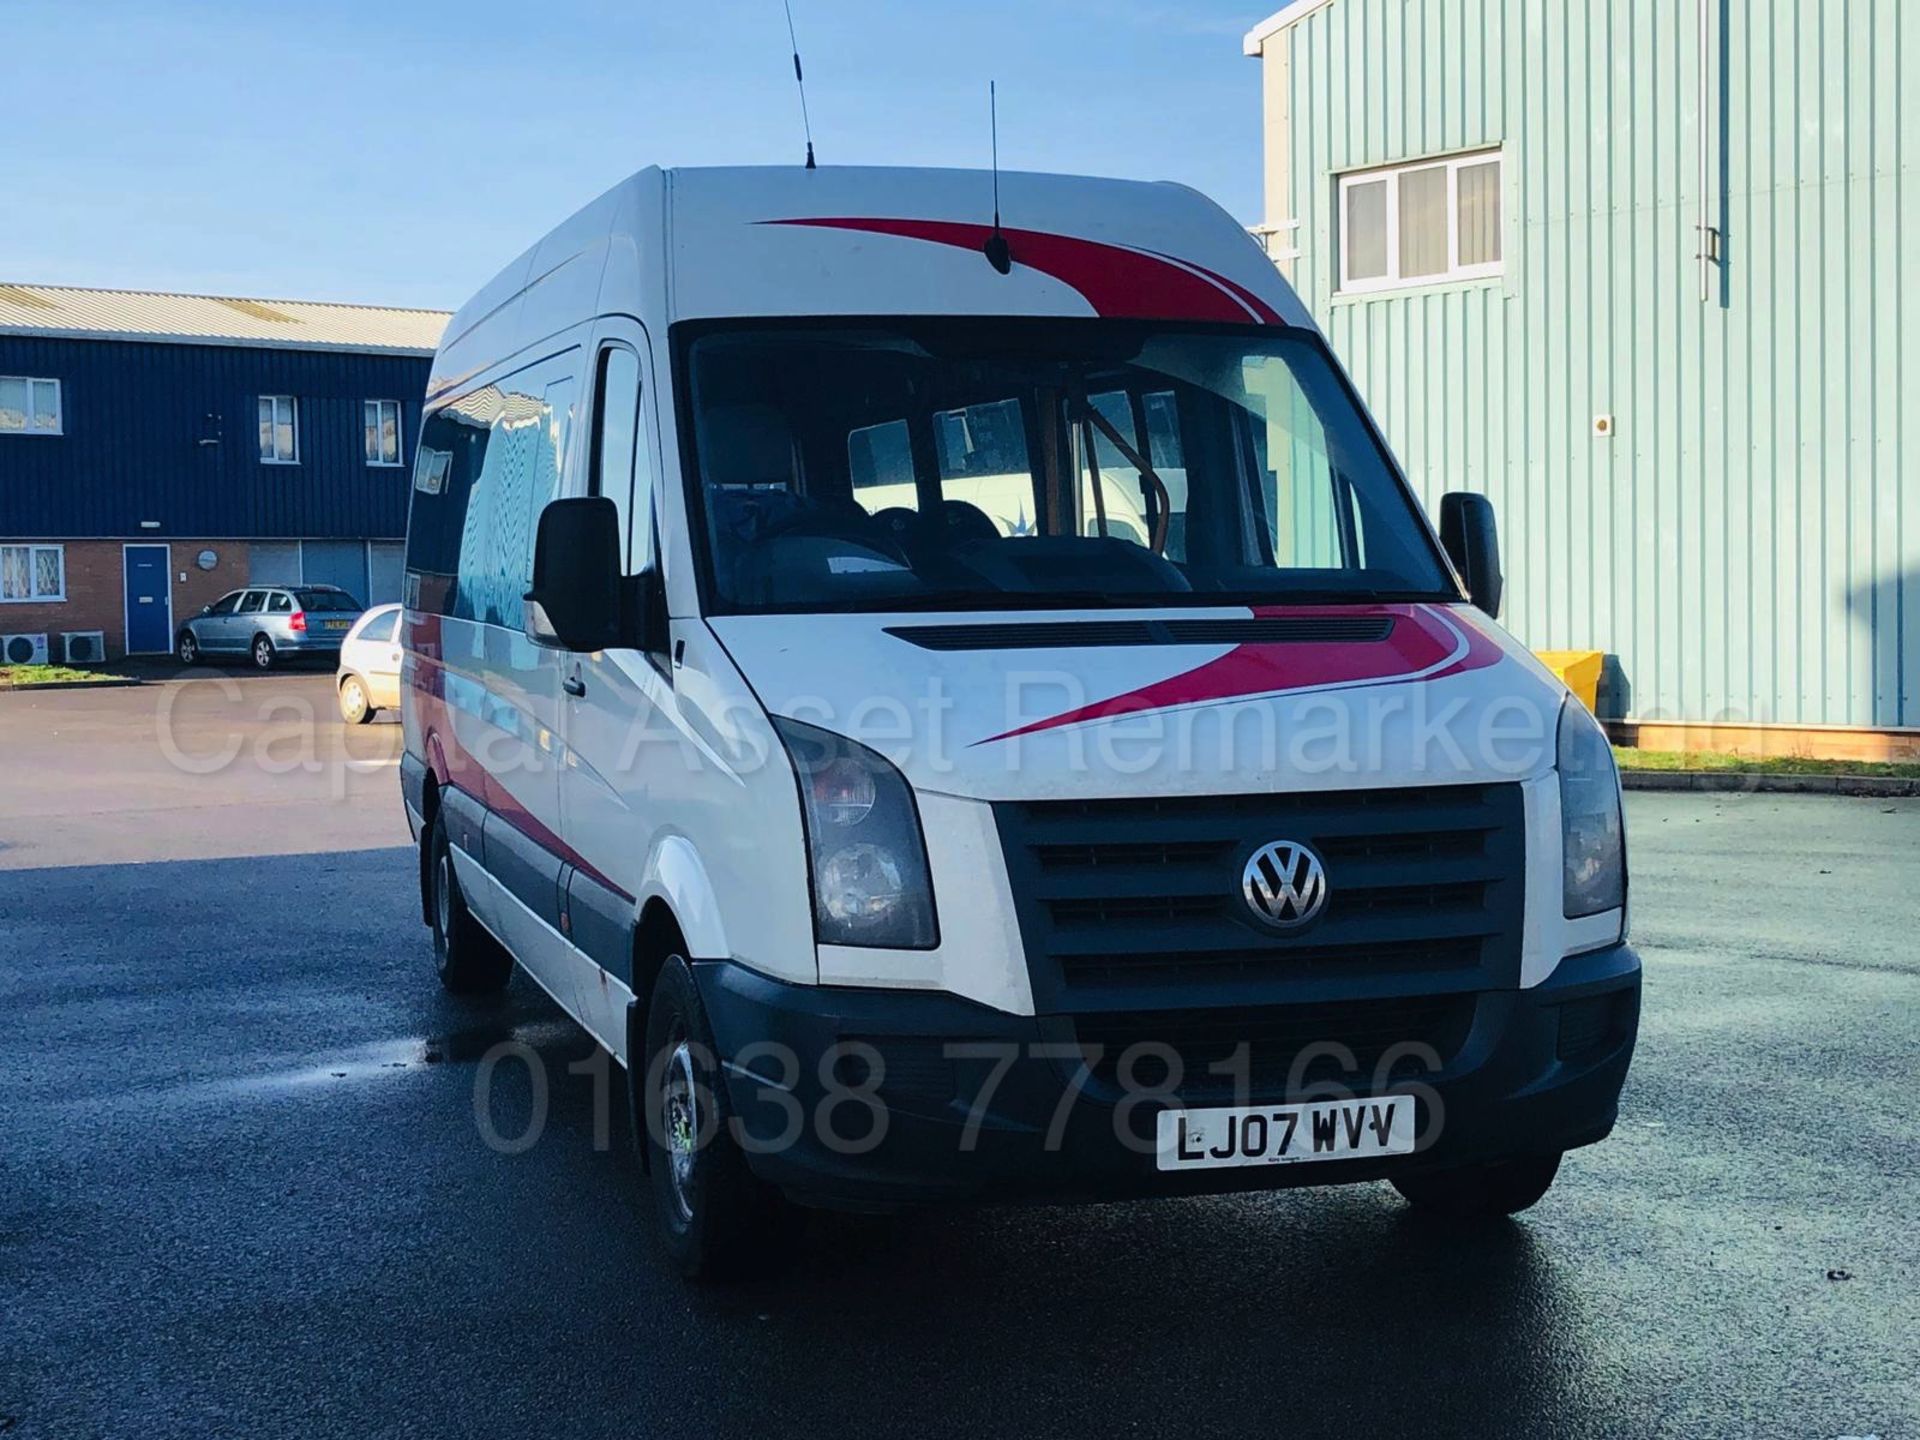 (On Sale) VOLKSWAGEN CRAFTER 2.5 TDI *LWB - 16 SEATER MINI-BUS* (2007) *ELECTRIC WHEEL CHAIR LIFT* - Image 11 of 35